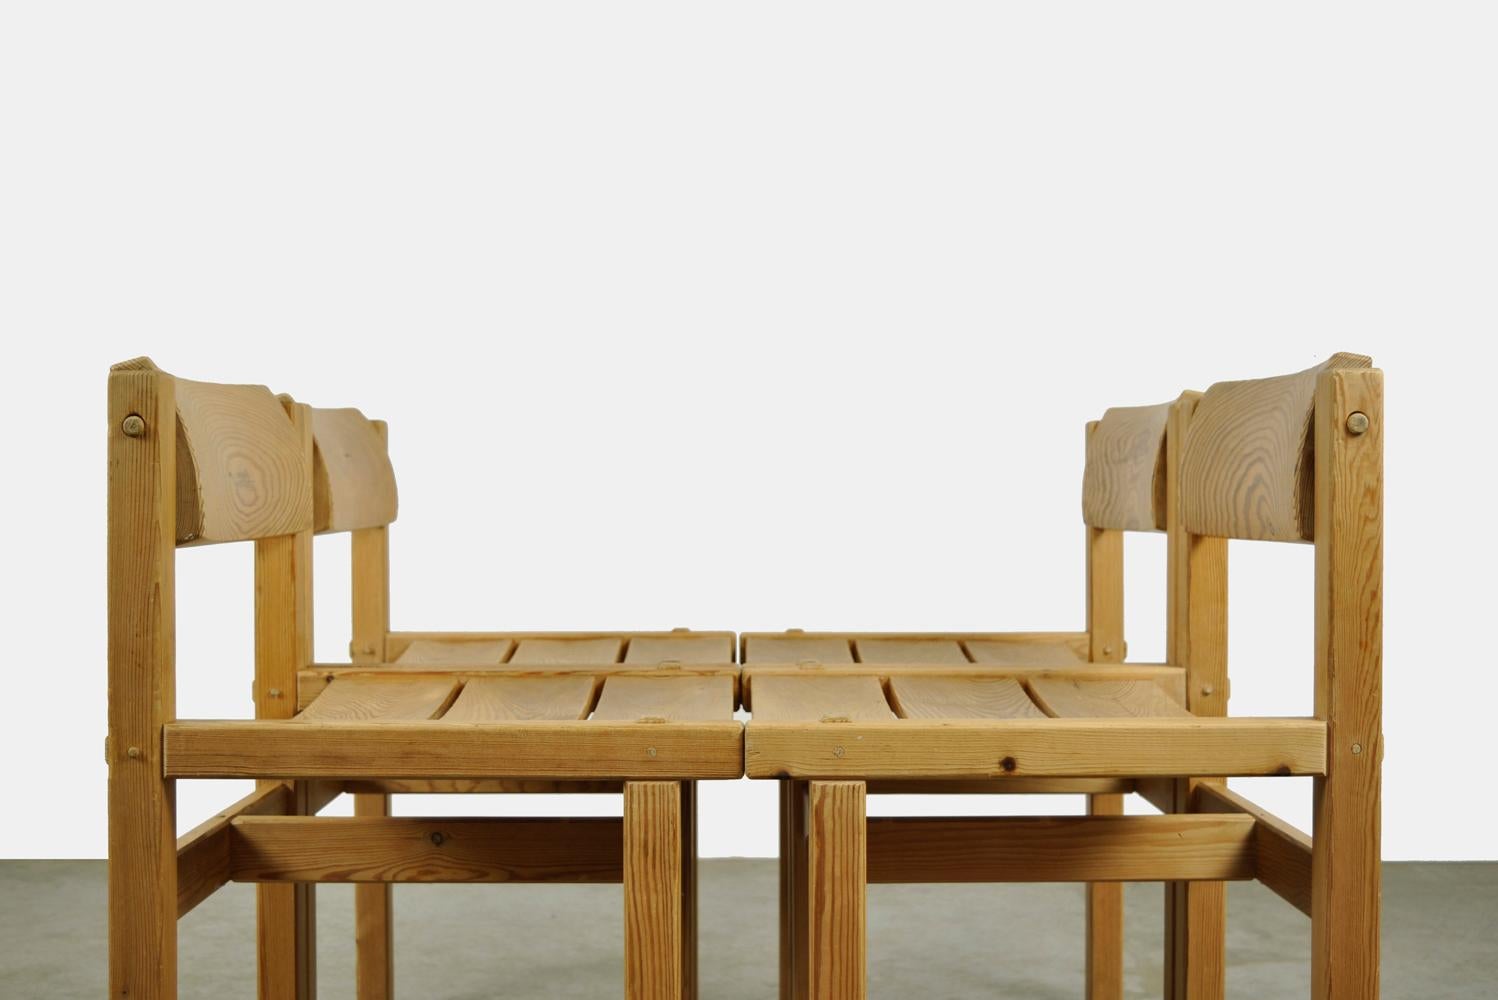 Trybo pine dining chairs (4) by Edvin Helseth for Stange Bruk, Norway 1960s For Sale 2